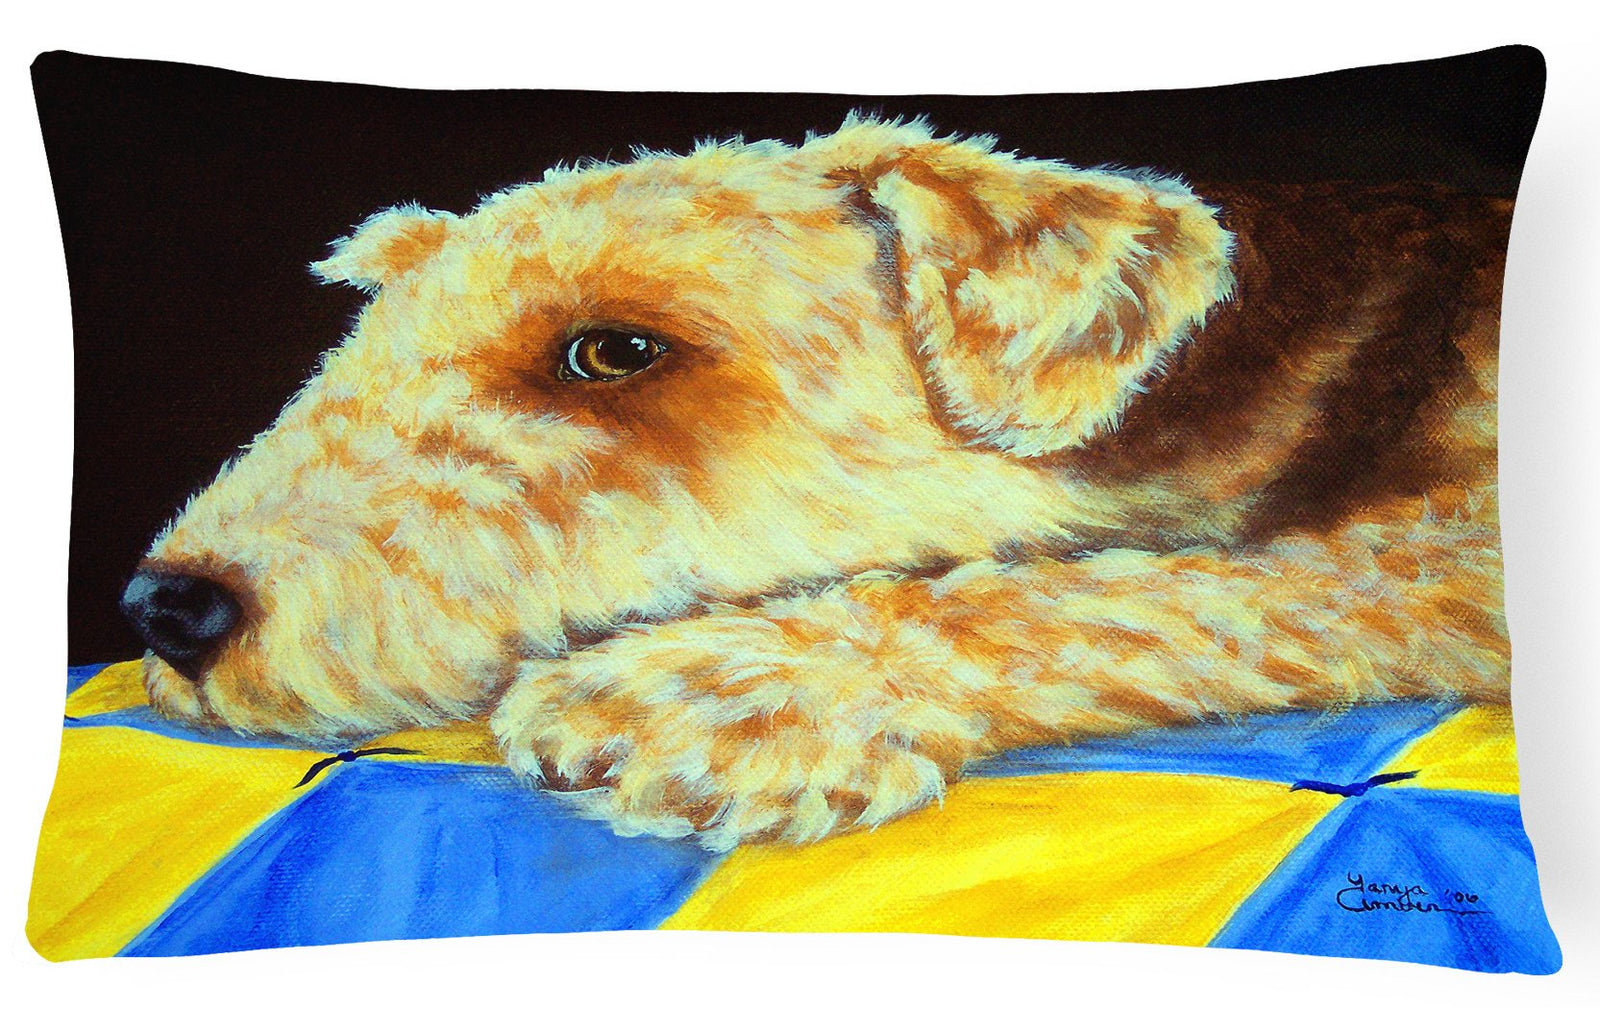 Airedale Terrier Momma's Quilt Fabric Decorative Pillow AMB1174PW1216 by Caroline's Treasures